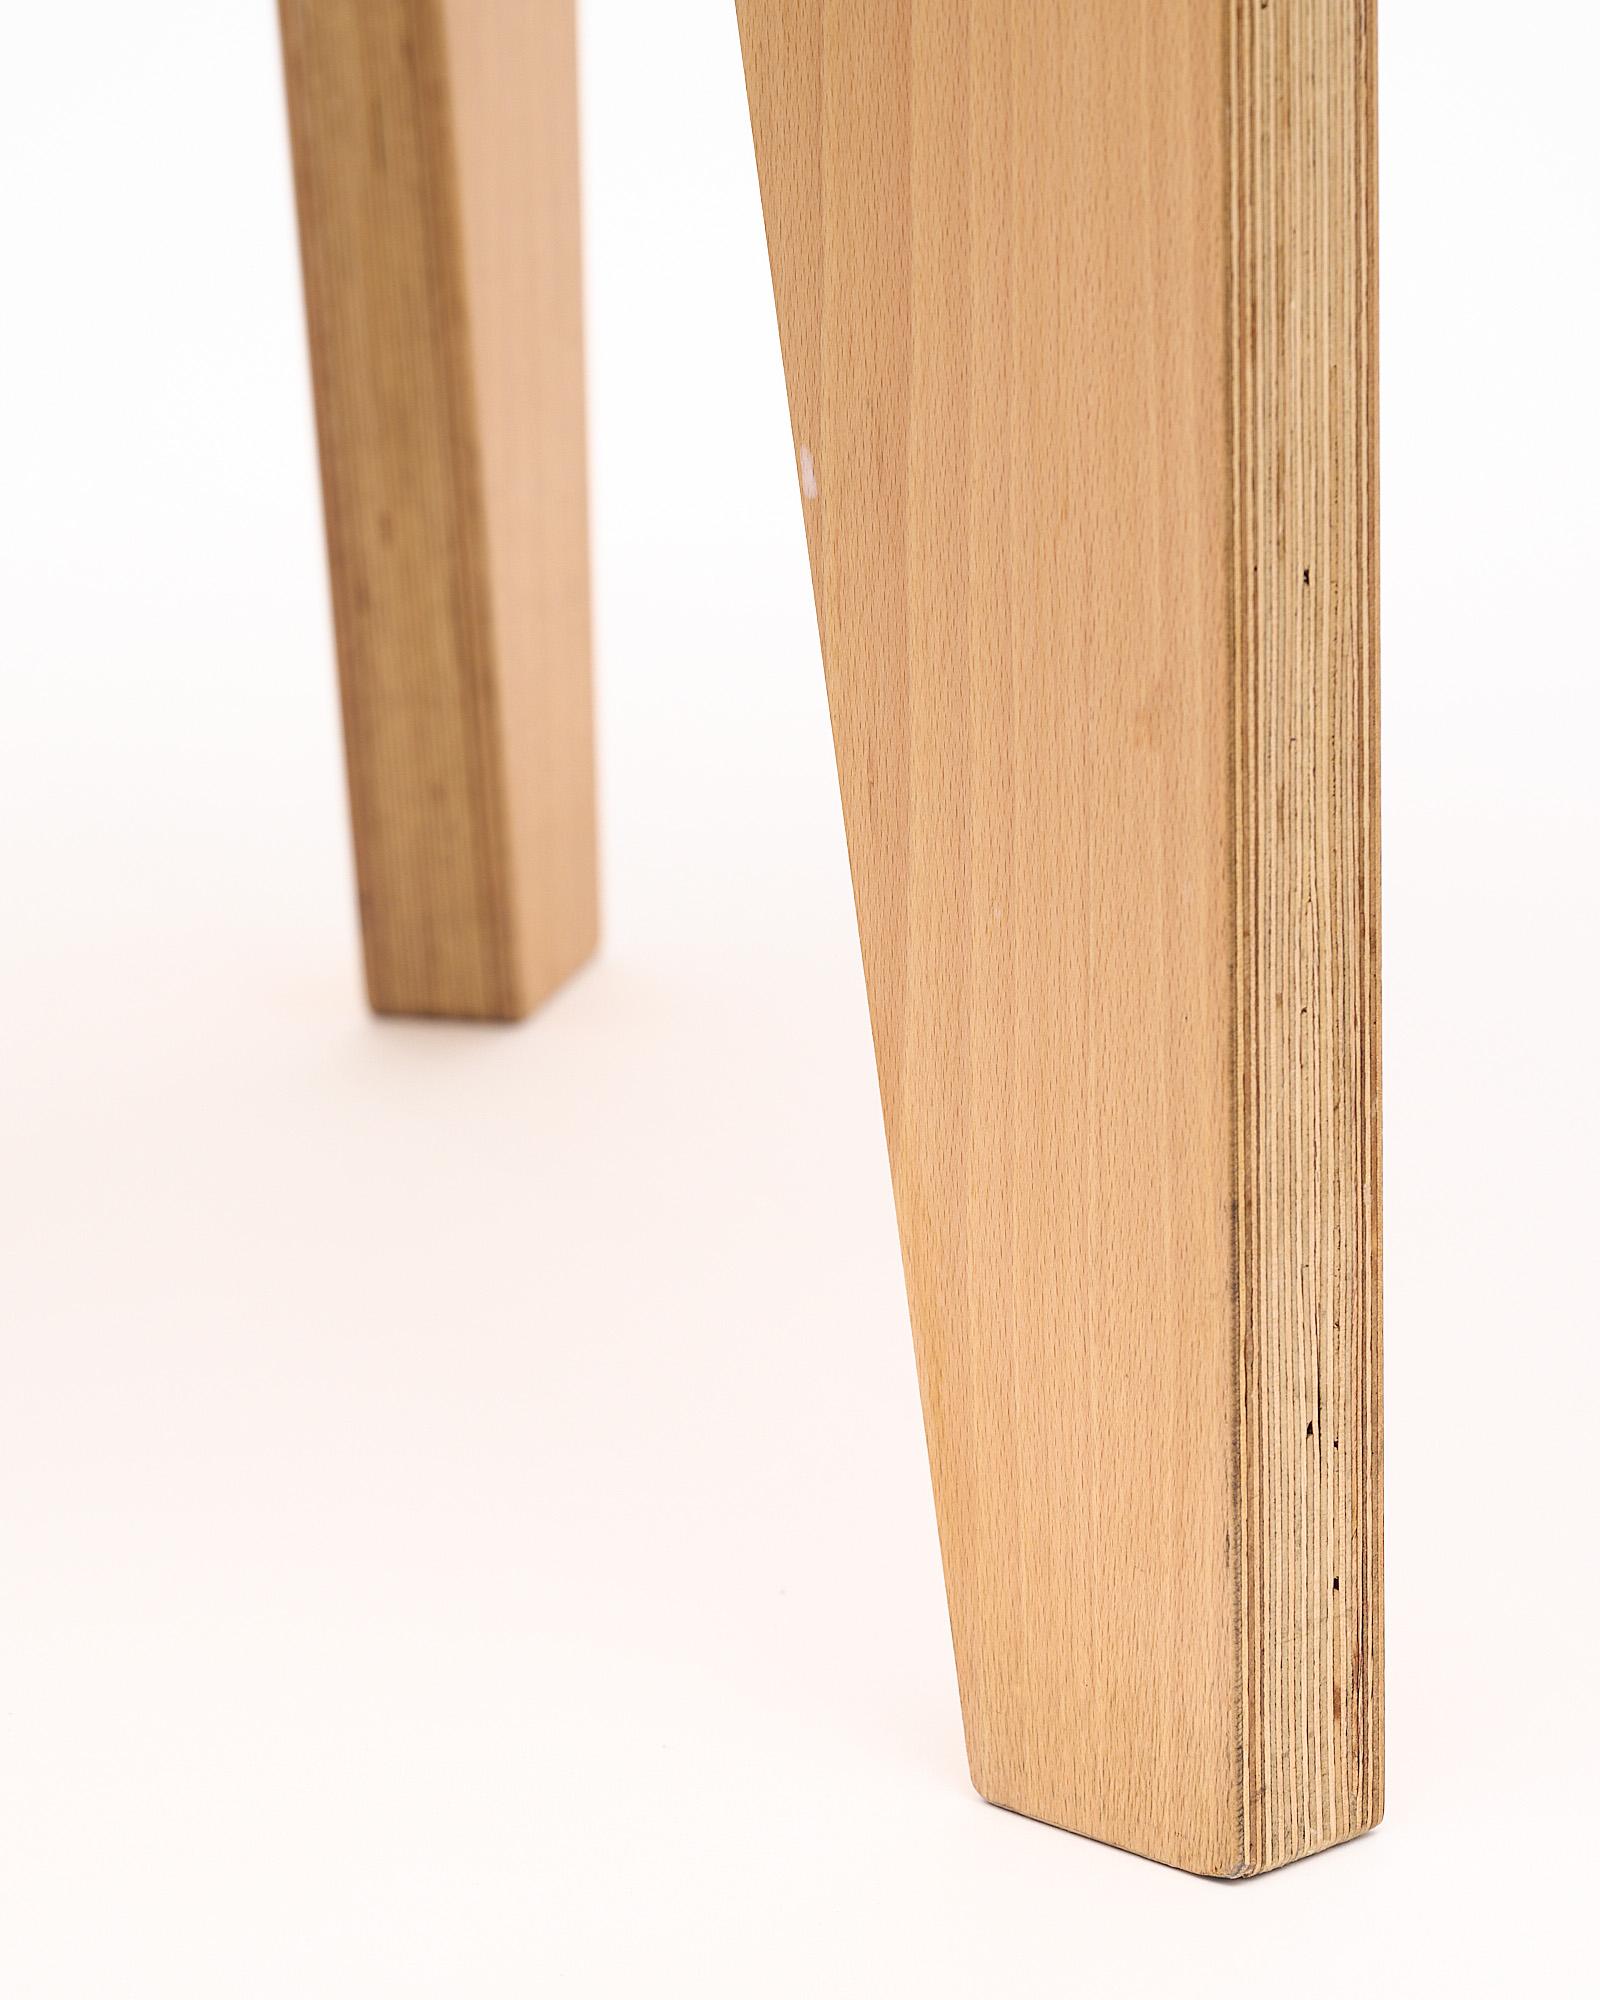 Wood Modernist Side Tables In Good Condition For Sale In Austin, TX